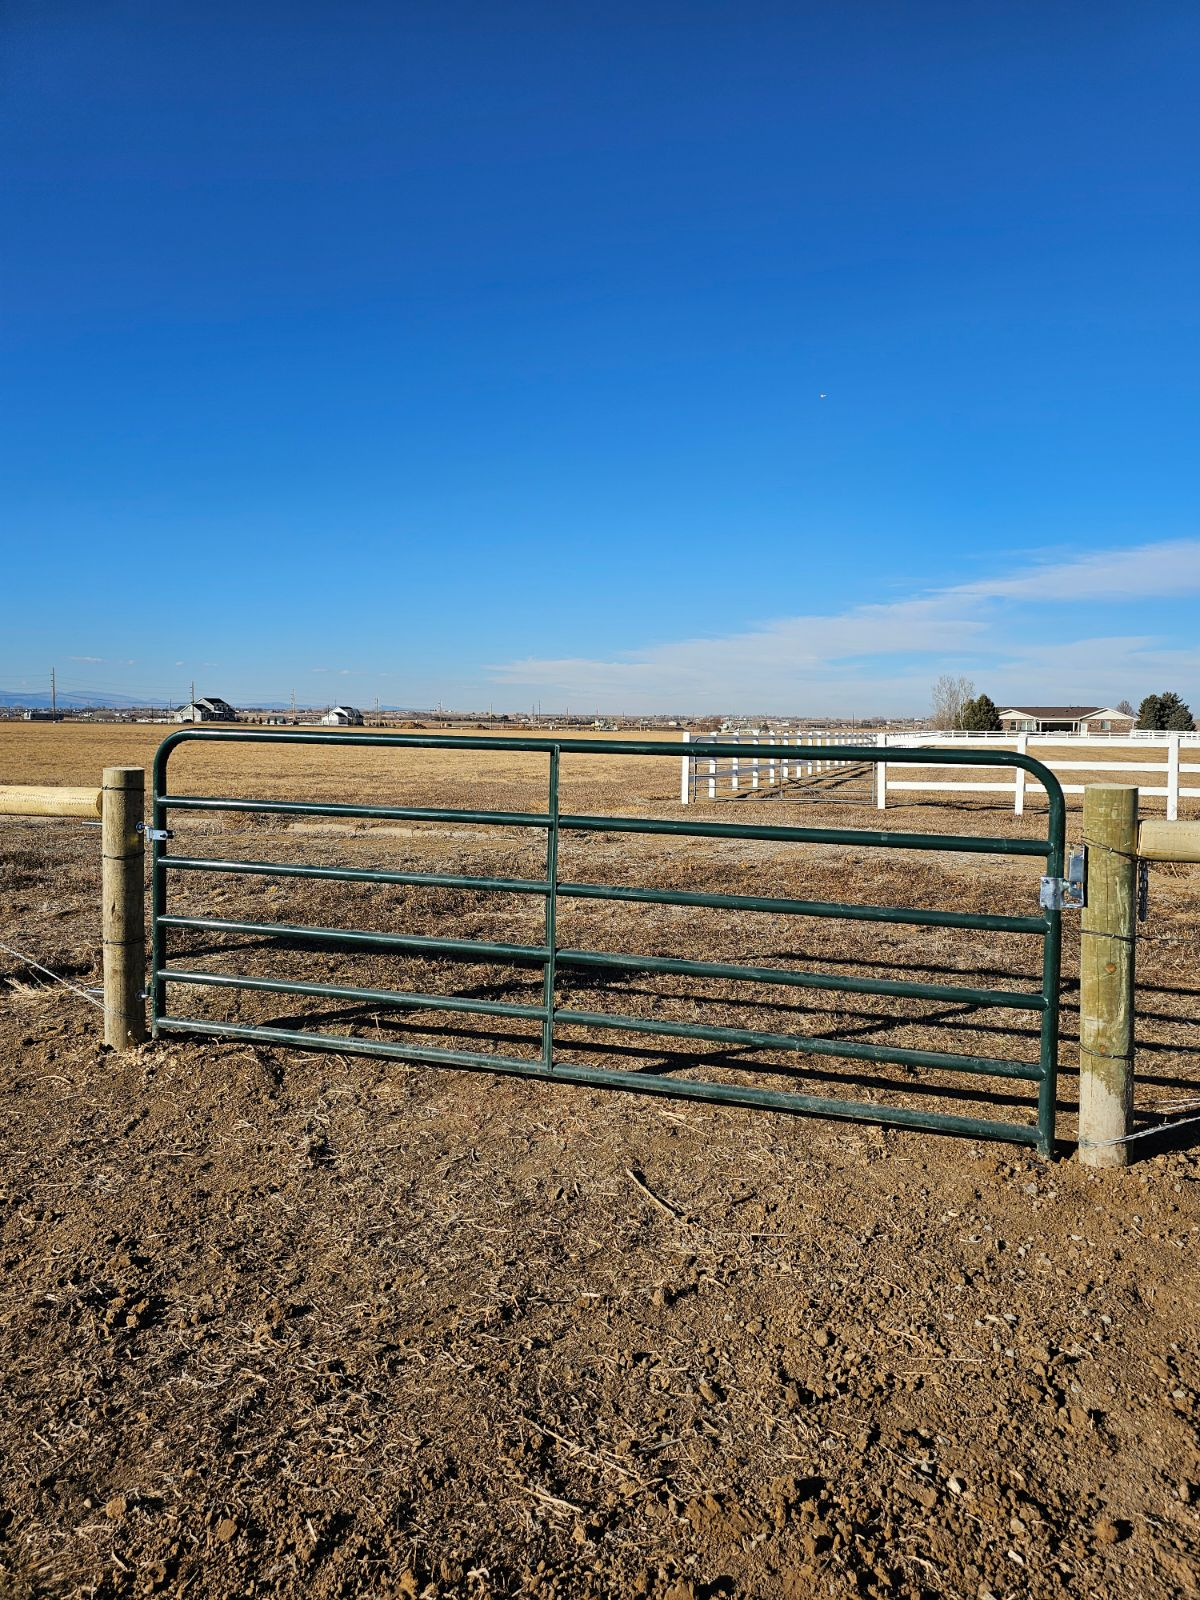 A green livestock gate built by Greater Western Fence sits in the middle of a dirt field.